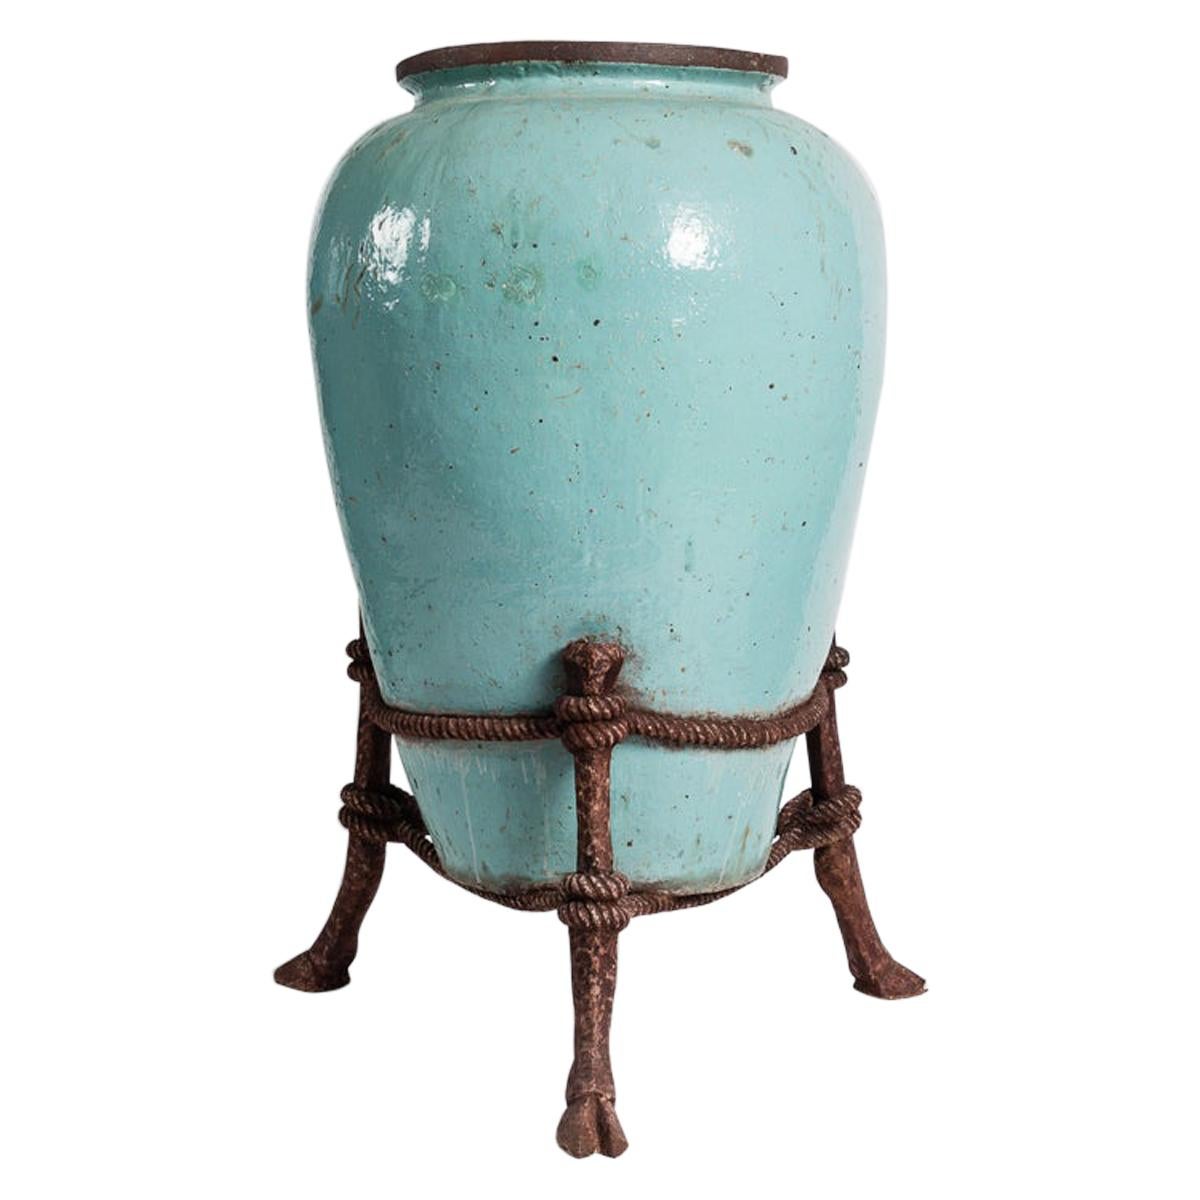 Atelier Saigon, Pair of Large Urns with Rope and Hoof Base Motifs, Vietnam For Sale